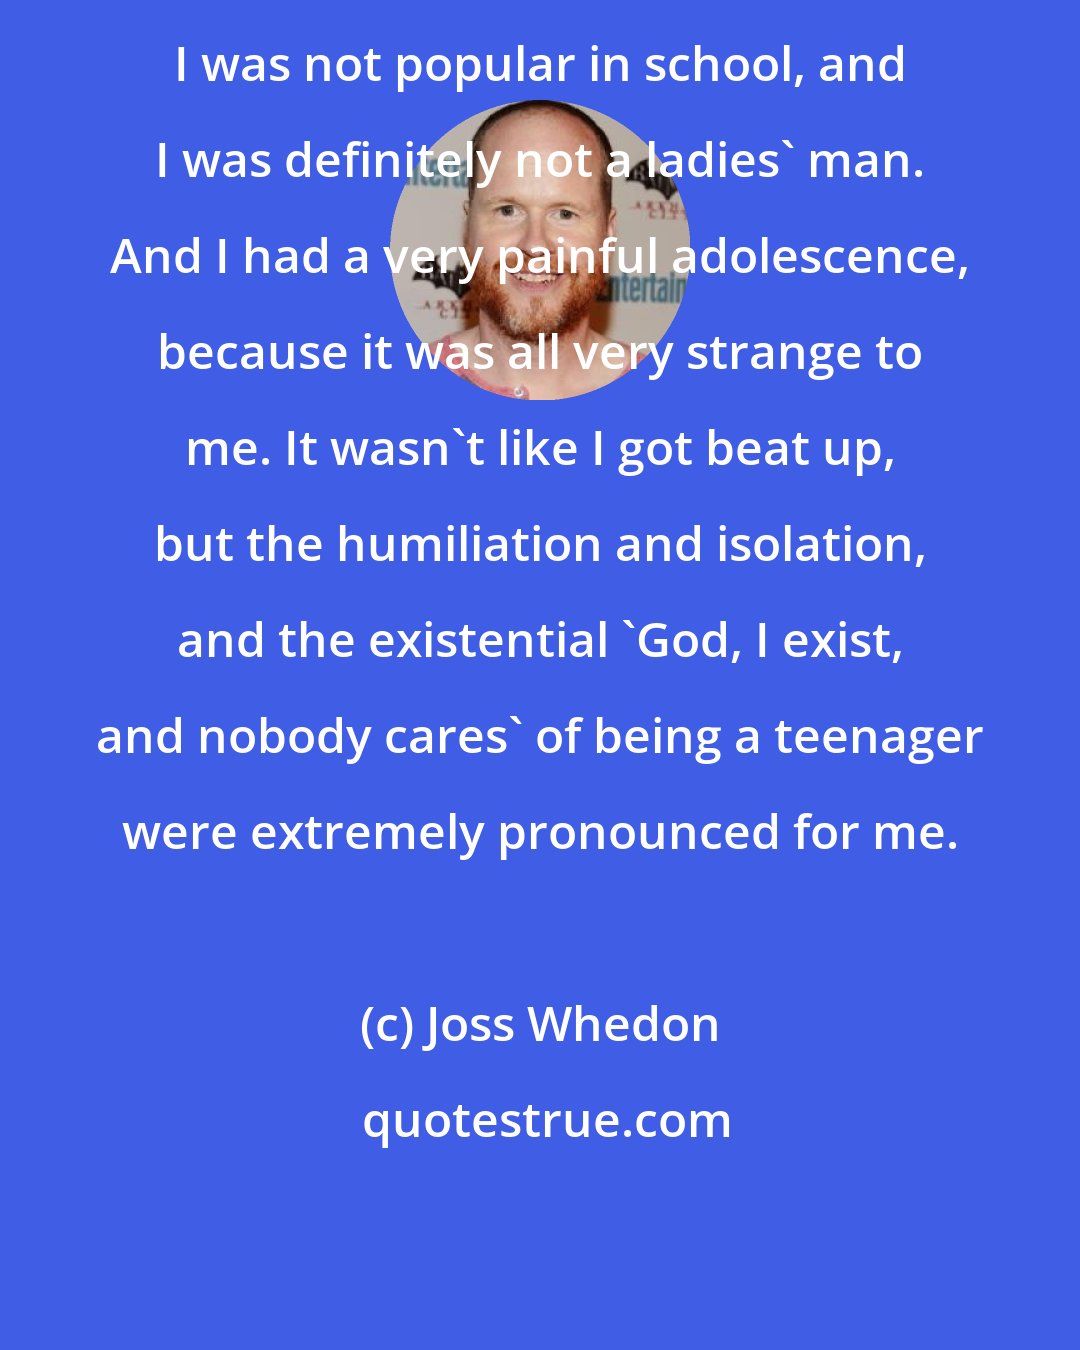 Joss Whedon: I was not popular in school, and I was definitely not a ladies' man. And I had a very painful adolescence, because it was all very strange to me. It wasn't like I got beat up, but the humiliation and isolation, and the existential 'God, I exist, and nobody cares' of being a teenager were extremely pronounced for me.